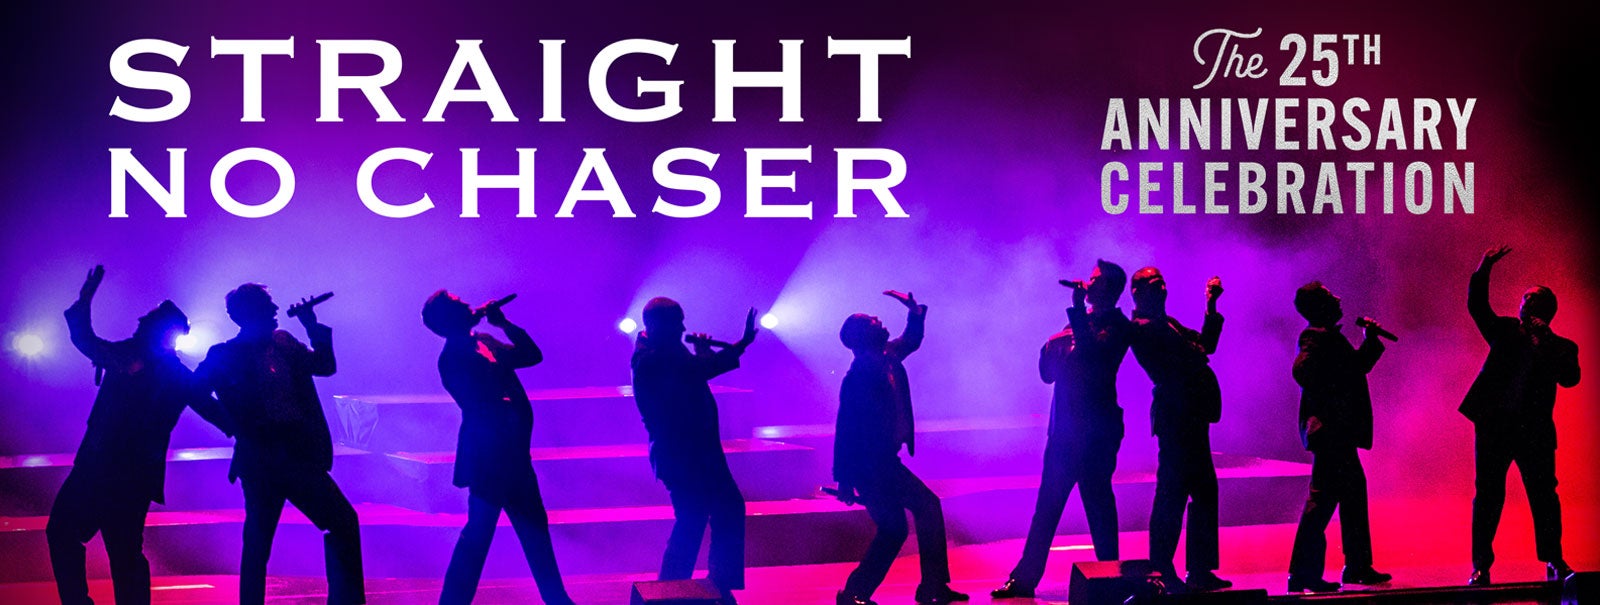 More Info - Straight No Chaser: The 25th Anniversary Celebration